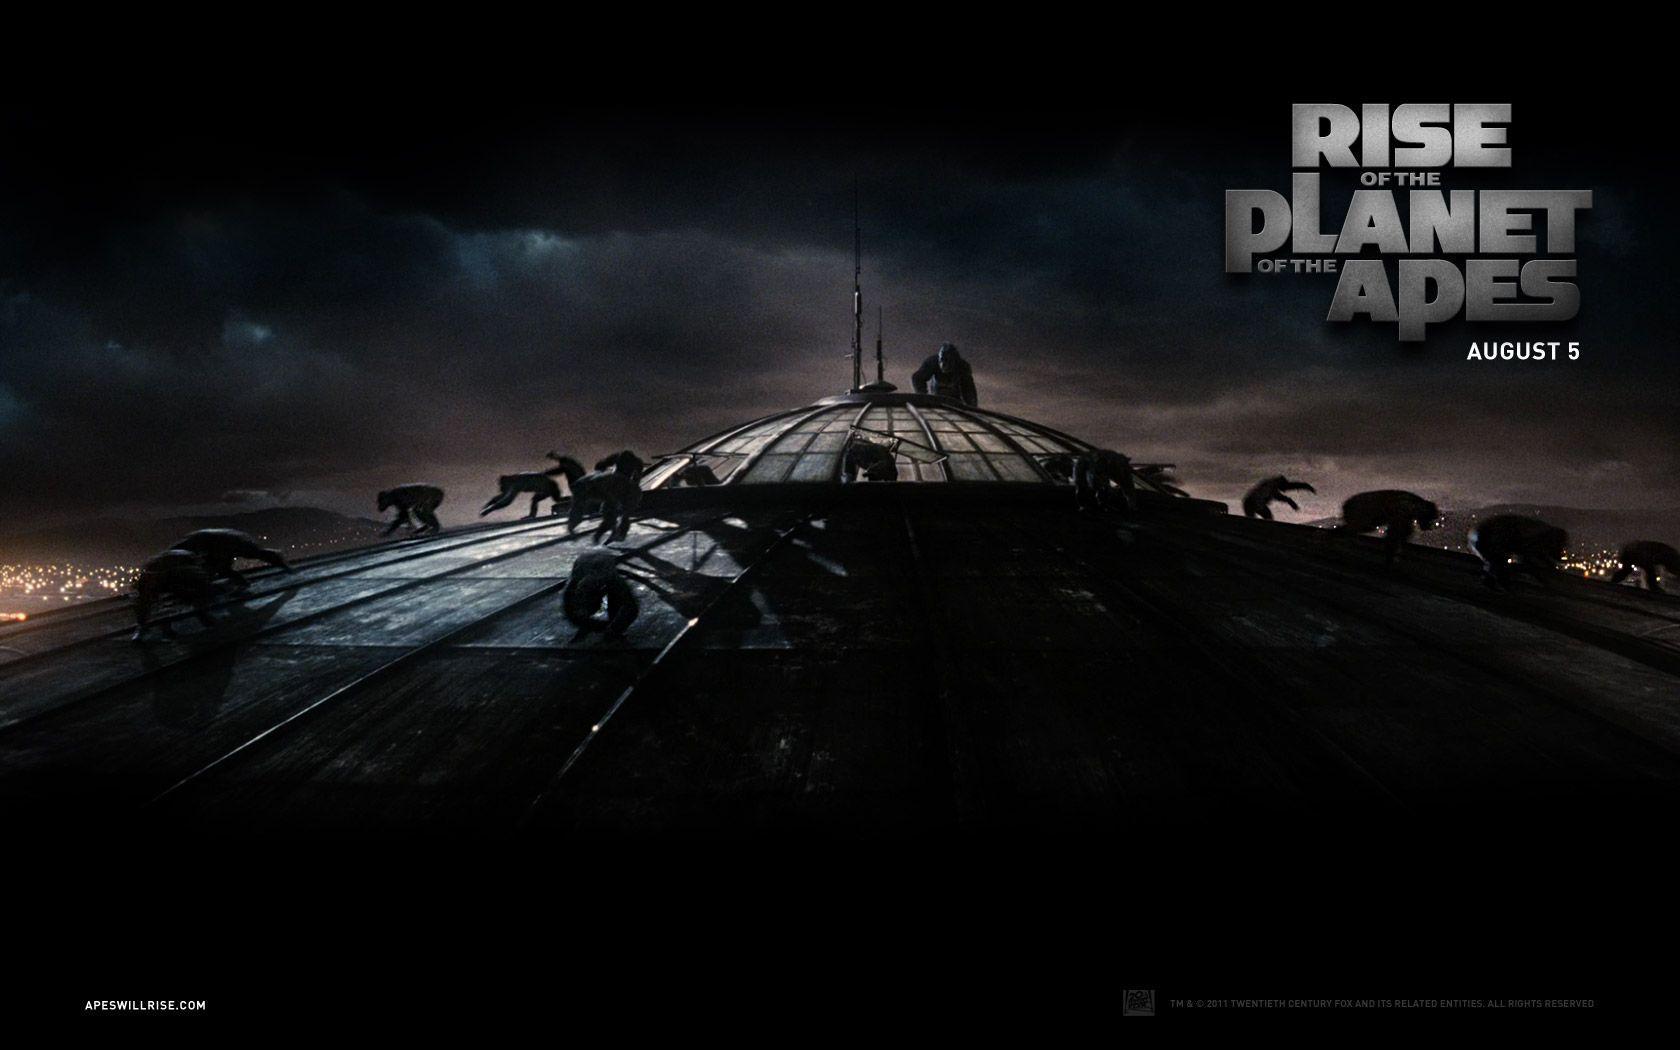 Rise of the Planet of the Apes wallpaper. Rise of the Planet